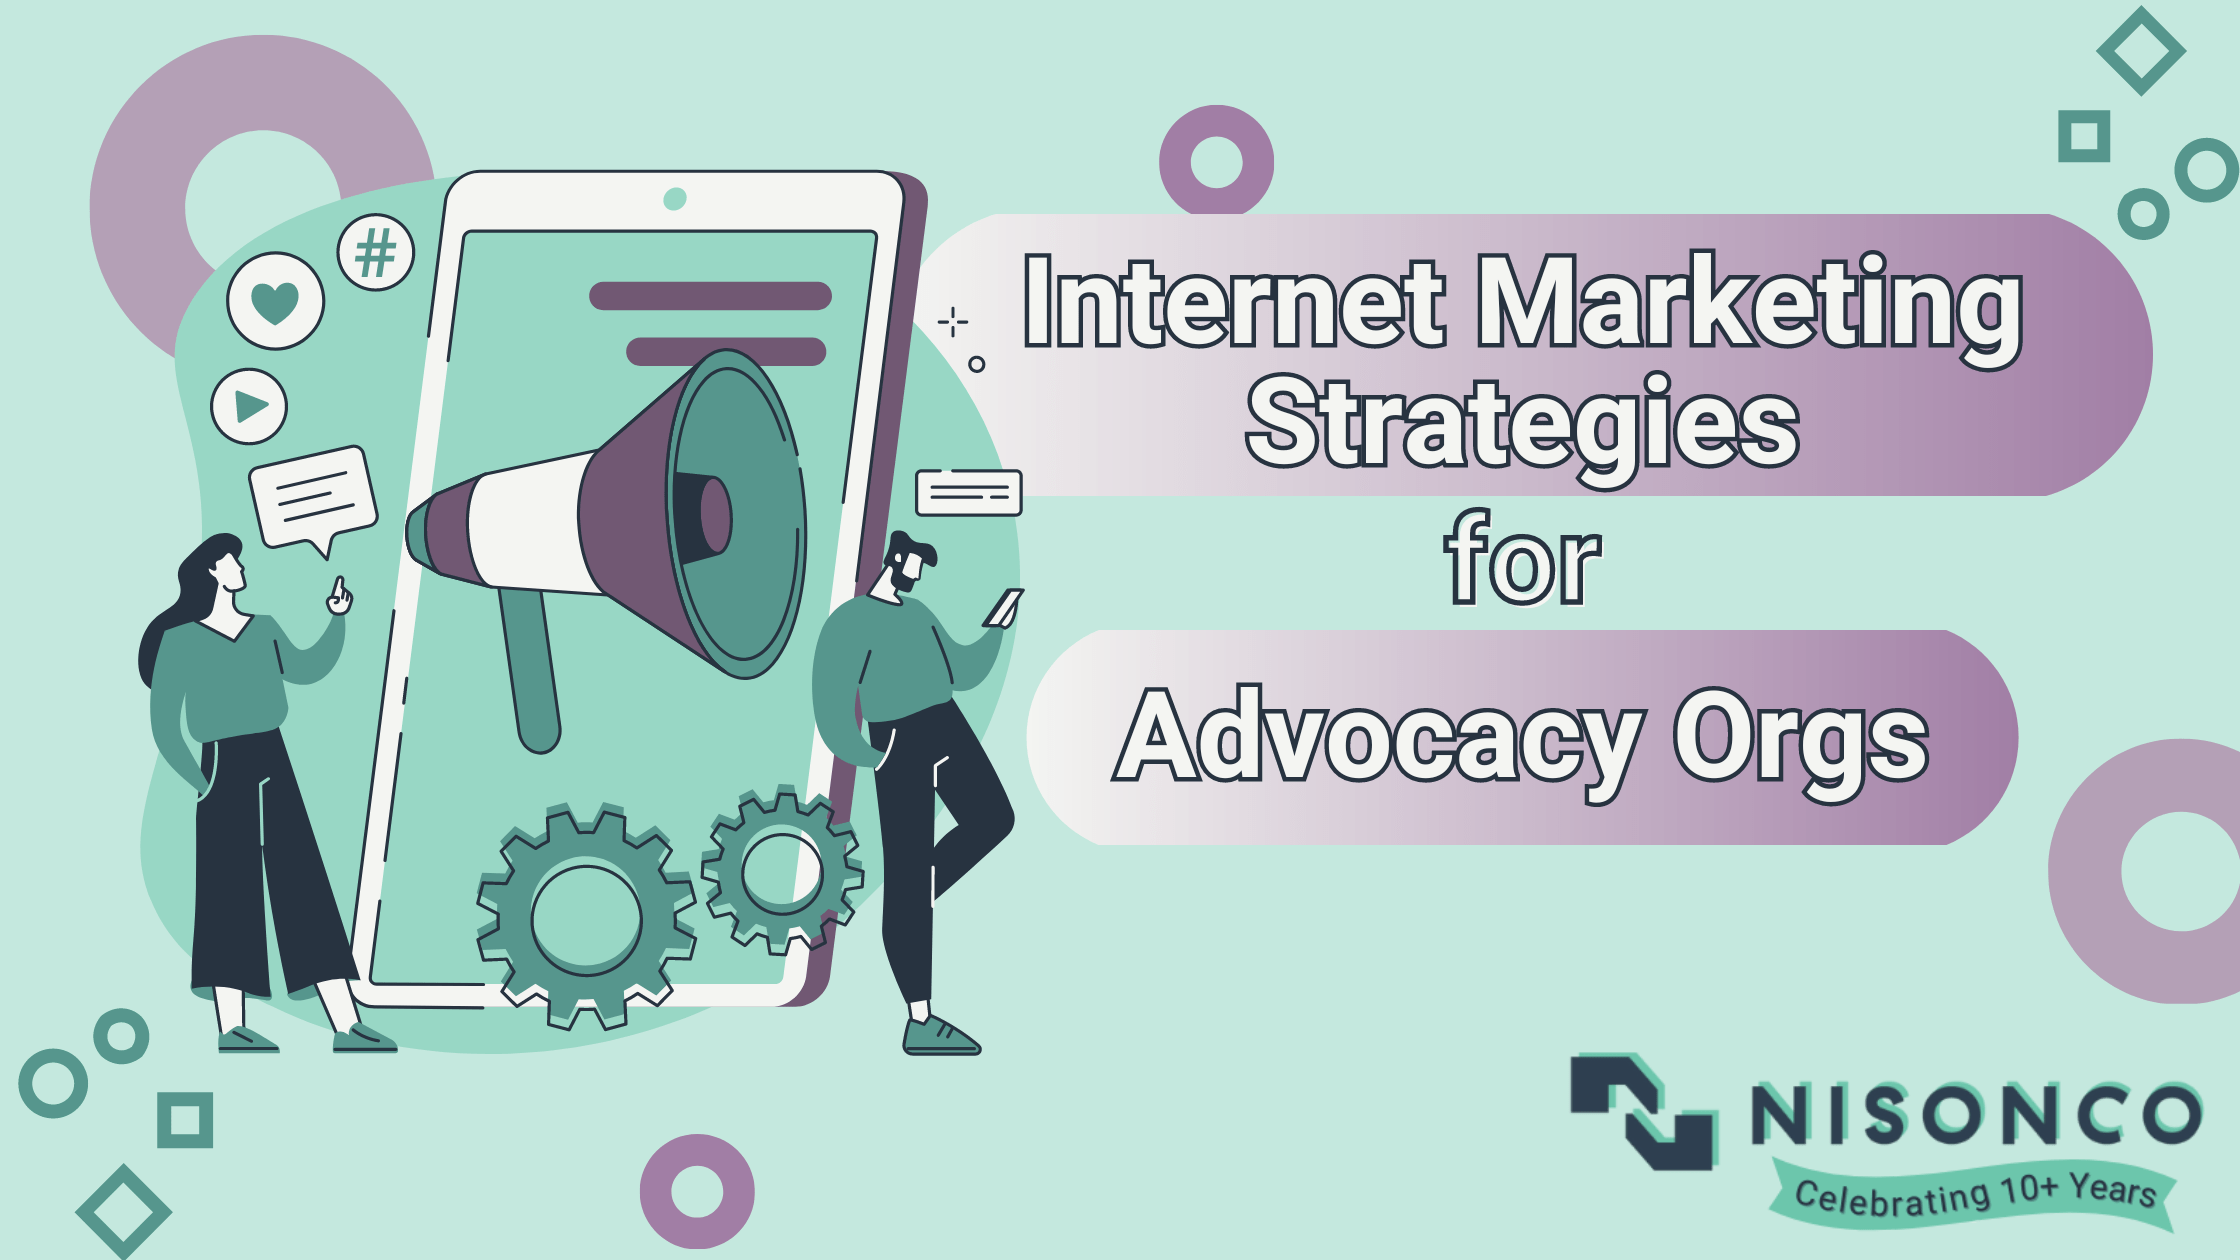 The text 'Internet Marketing Strategies for Advocacy Organizations' is to the right of a graphic of a large tablet with a megaphone on it, surrounded by a woman talking and a man leaning against the tablet and looking at his cell phone.